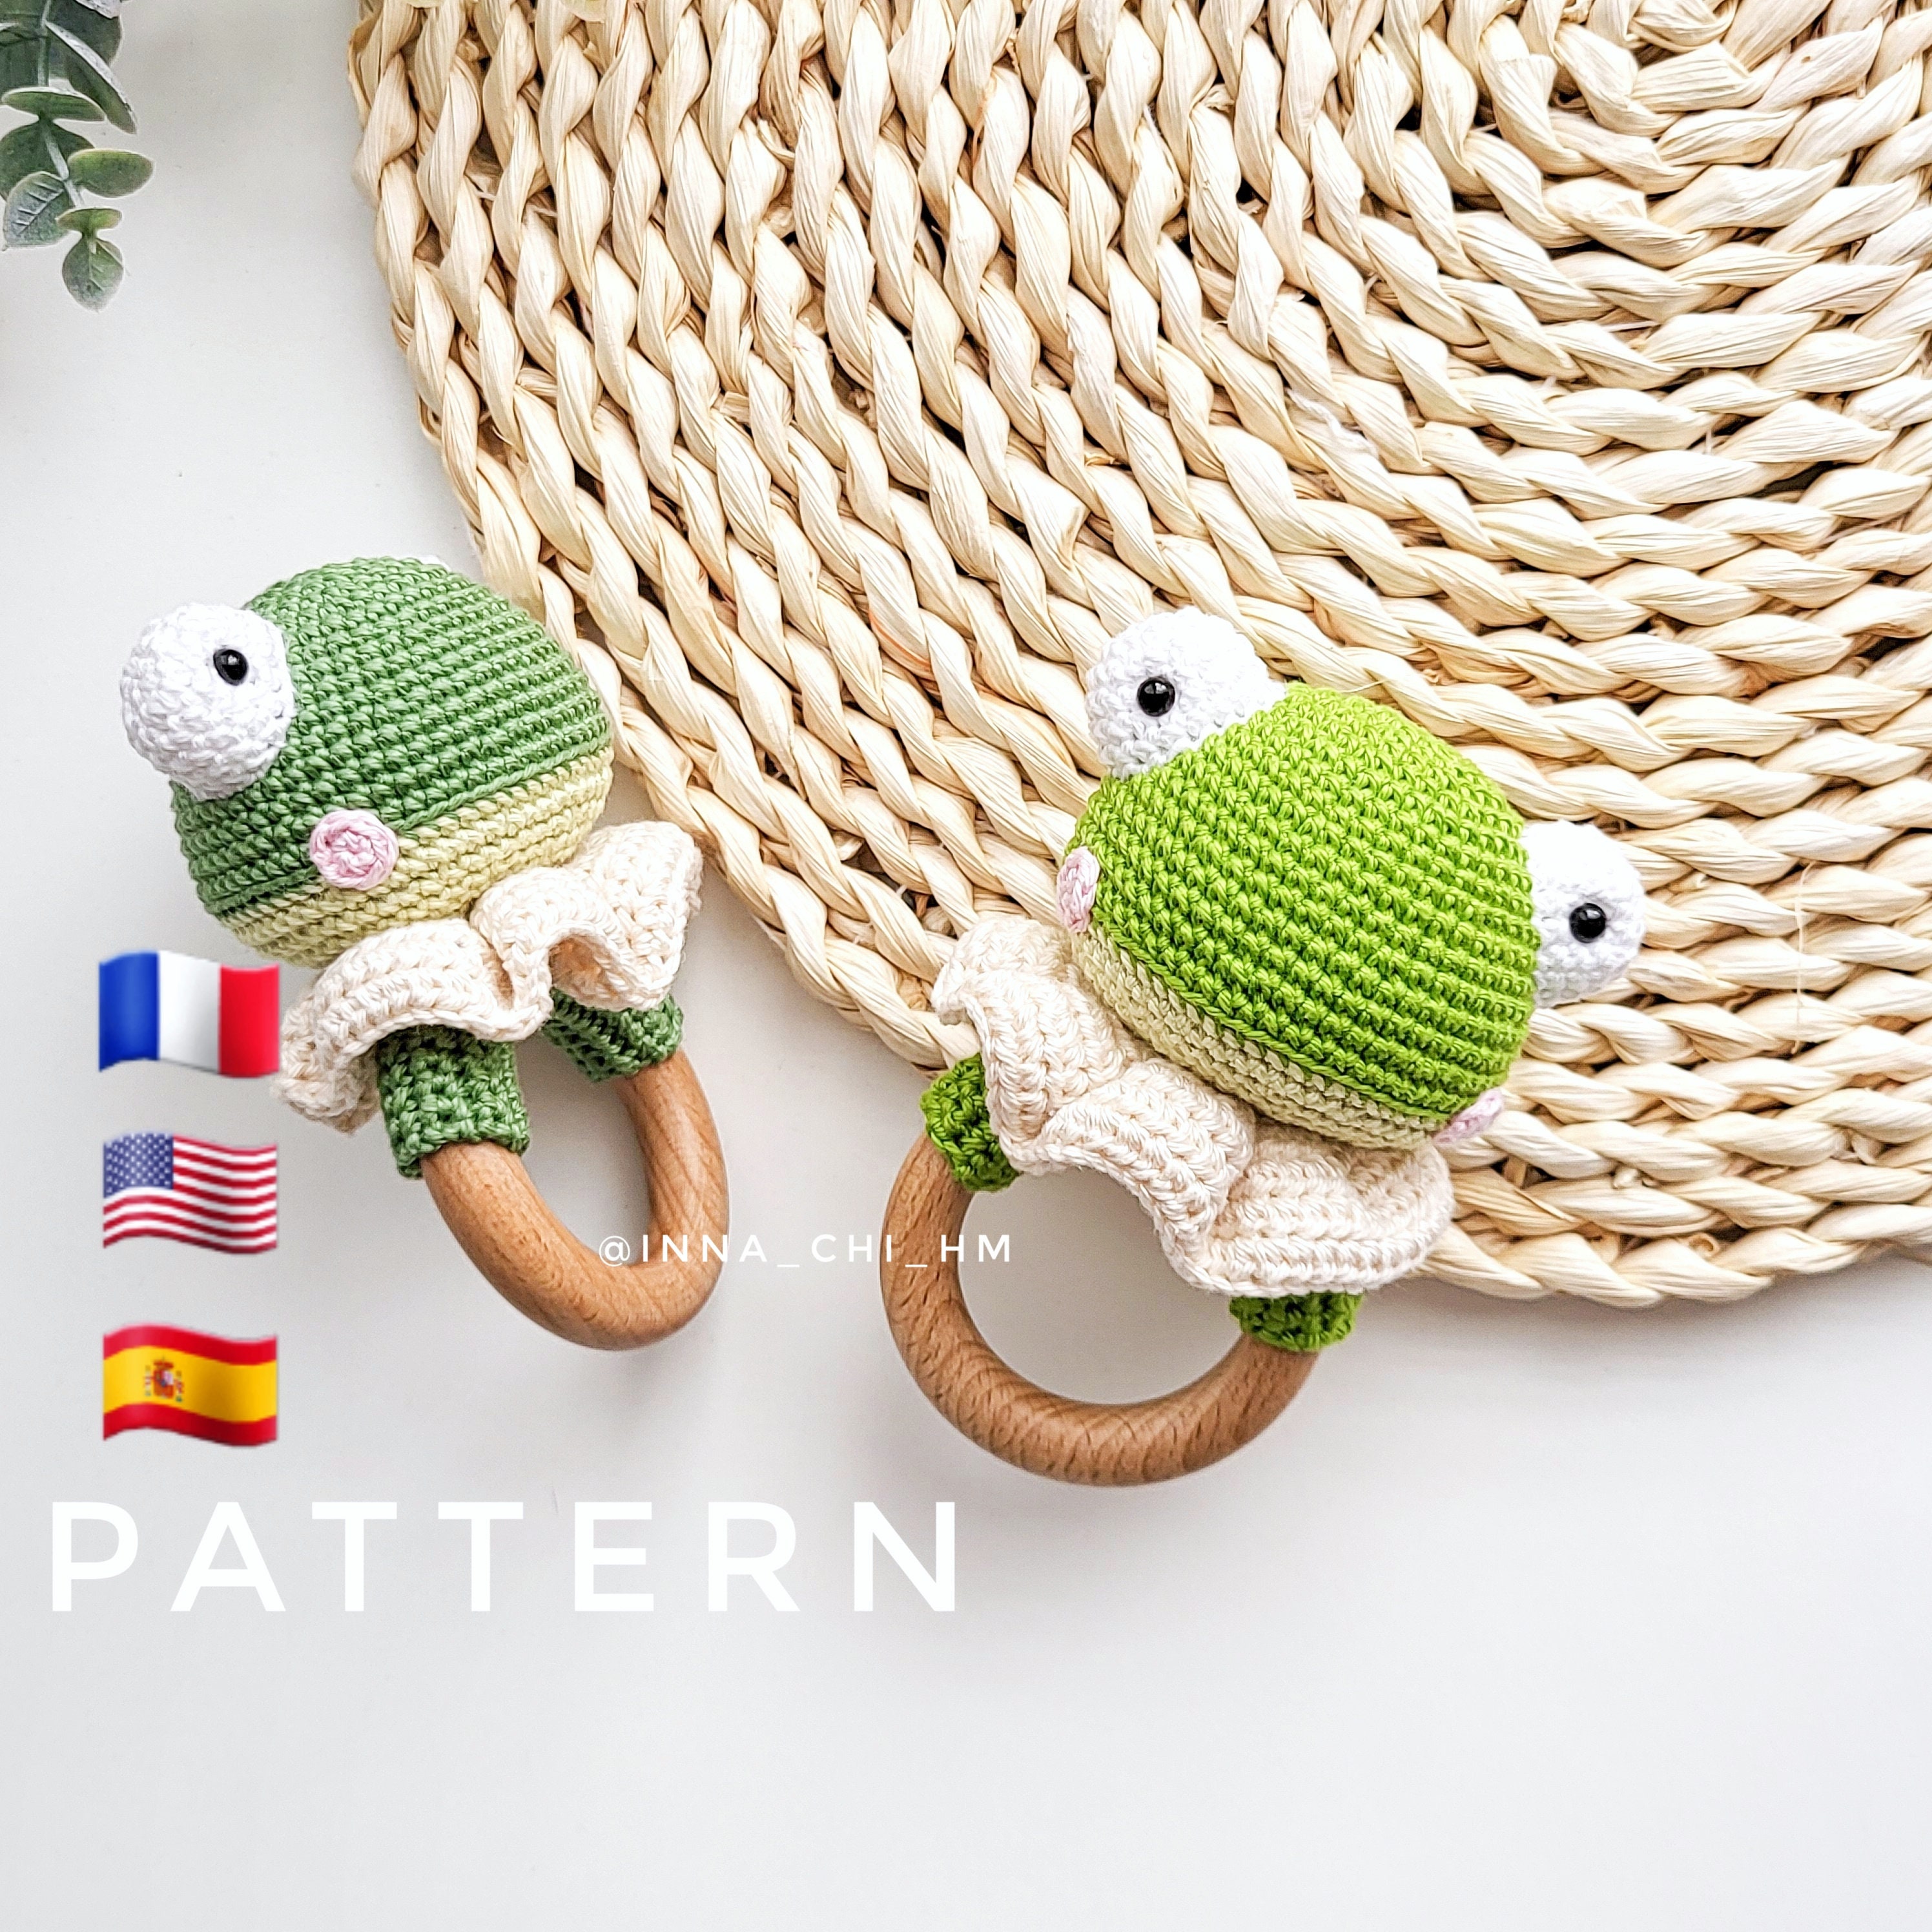 Buy Frog Baby Toy Online In India -  India